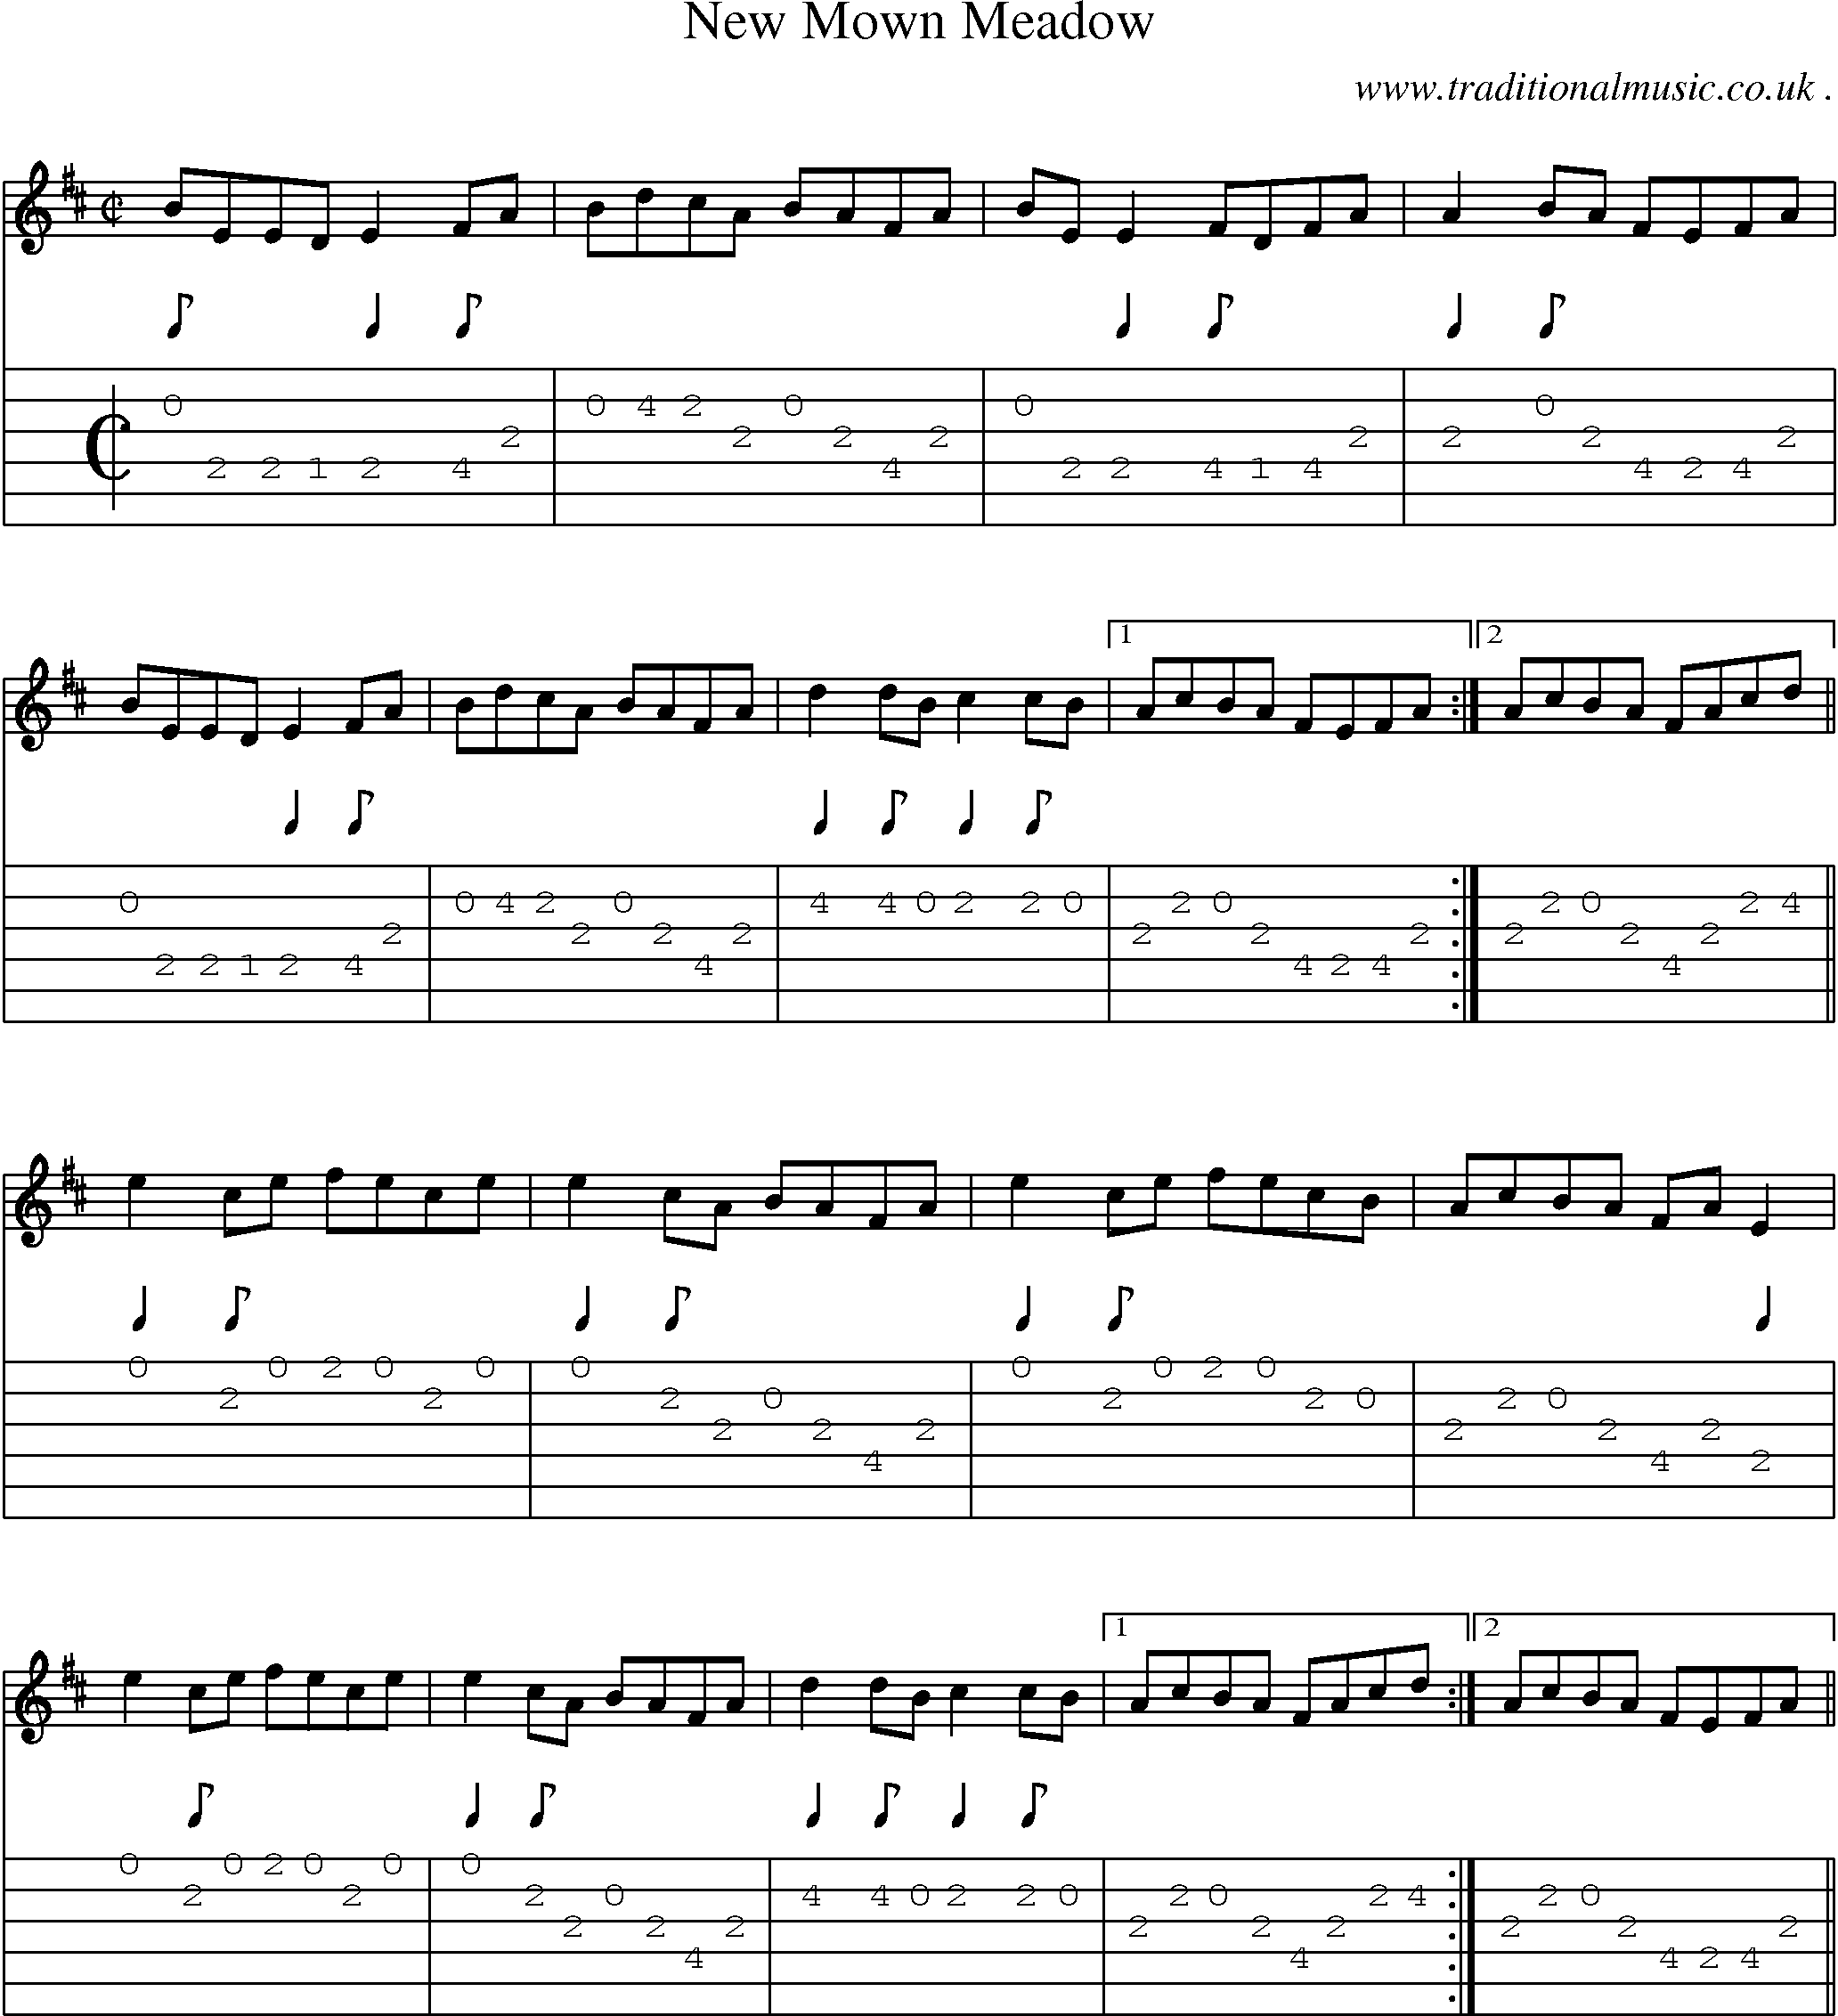 Sheet-Music and Guitar Tabs for New Mown Meadow